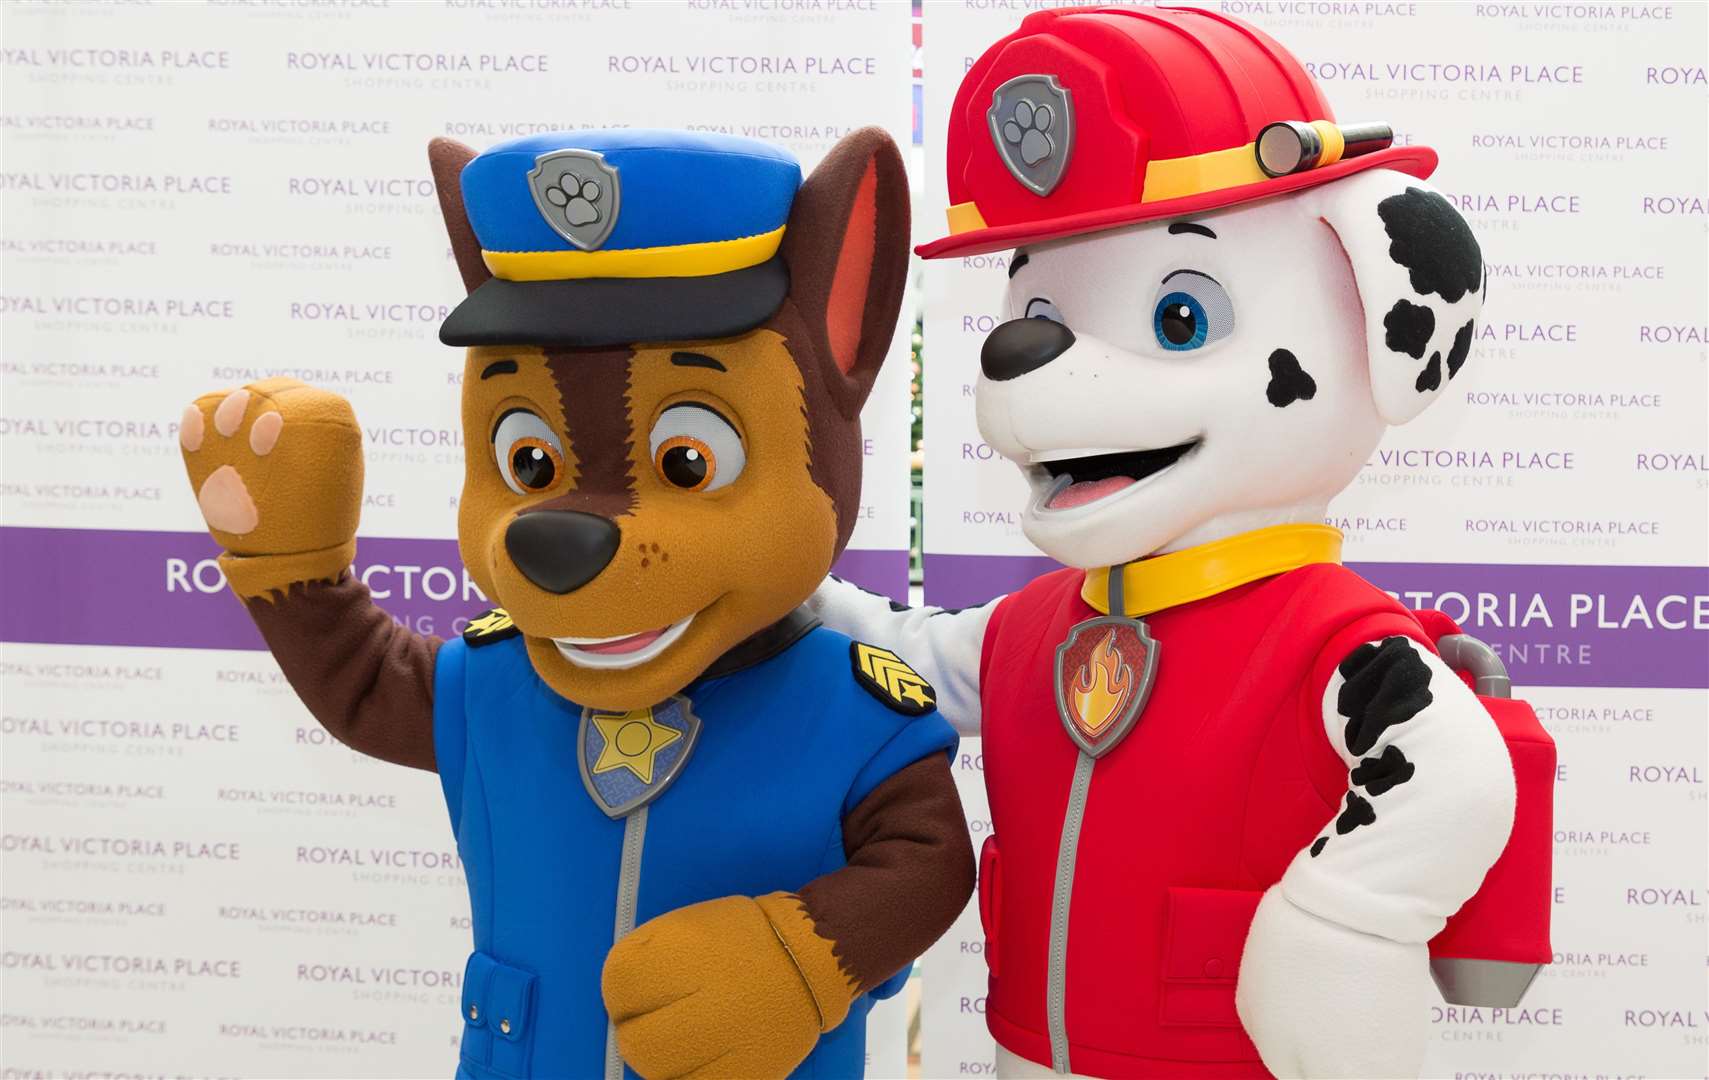 PAW Patrol will be at Royal Victoria Place Picture: David Bartholomew